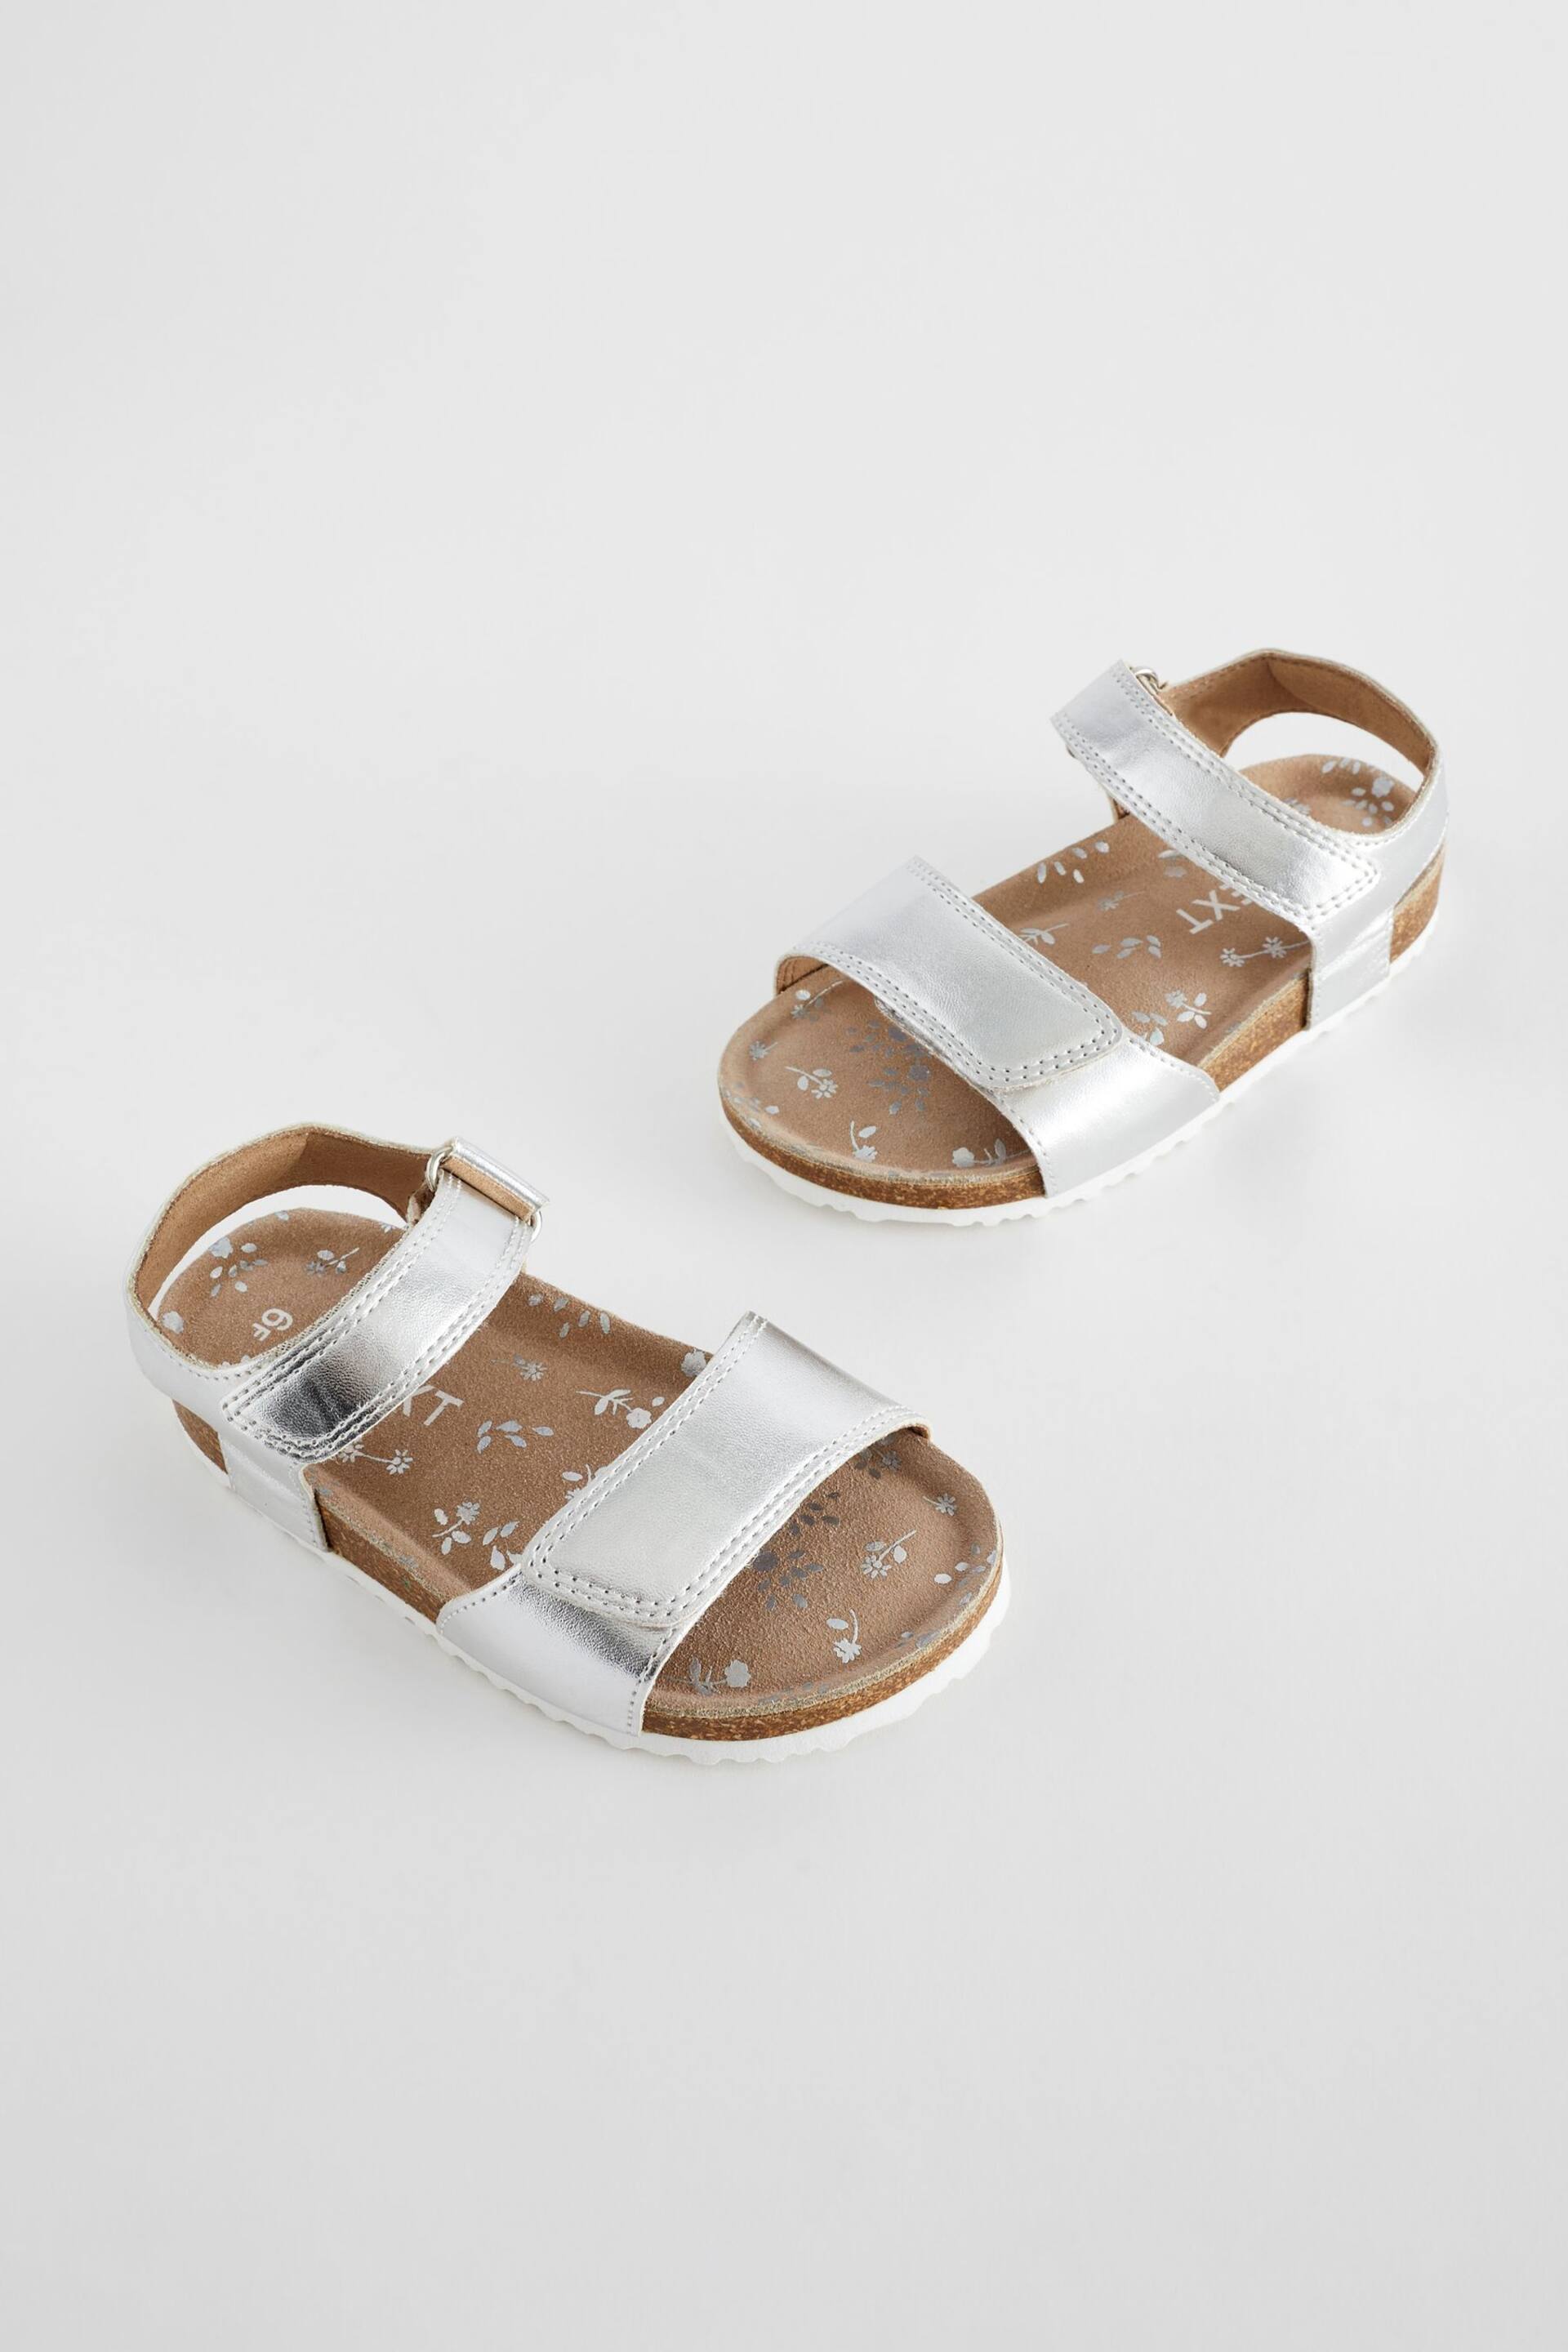 Silver Standard Fit (F) Leather Corkbed Sandals - Image 1 of 6